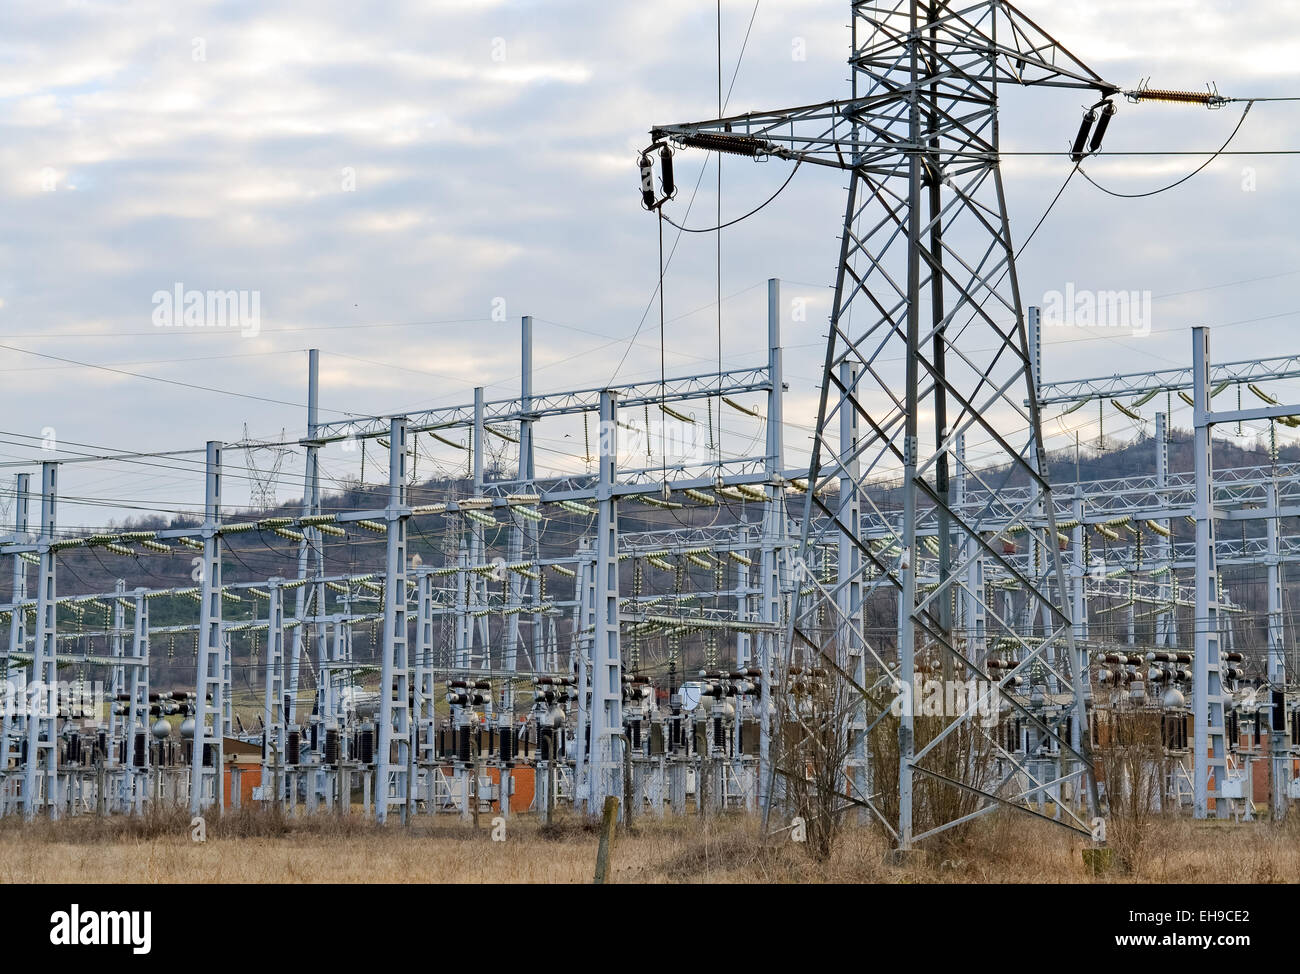 Substation for high voltage conversion and distribution of electricity Stock Photo